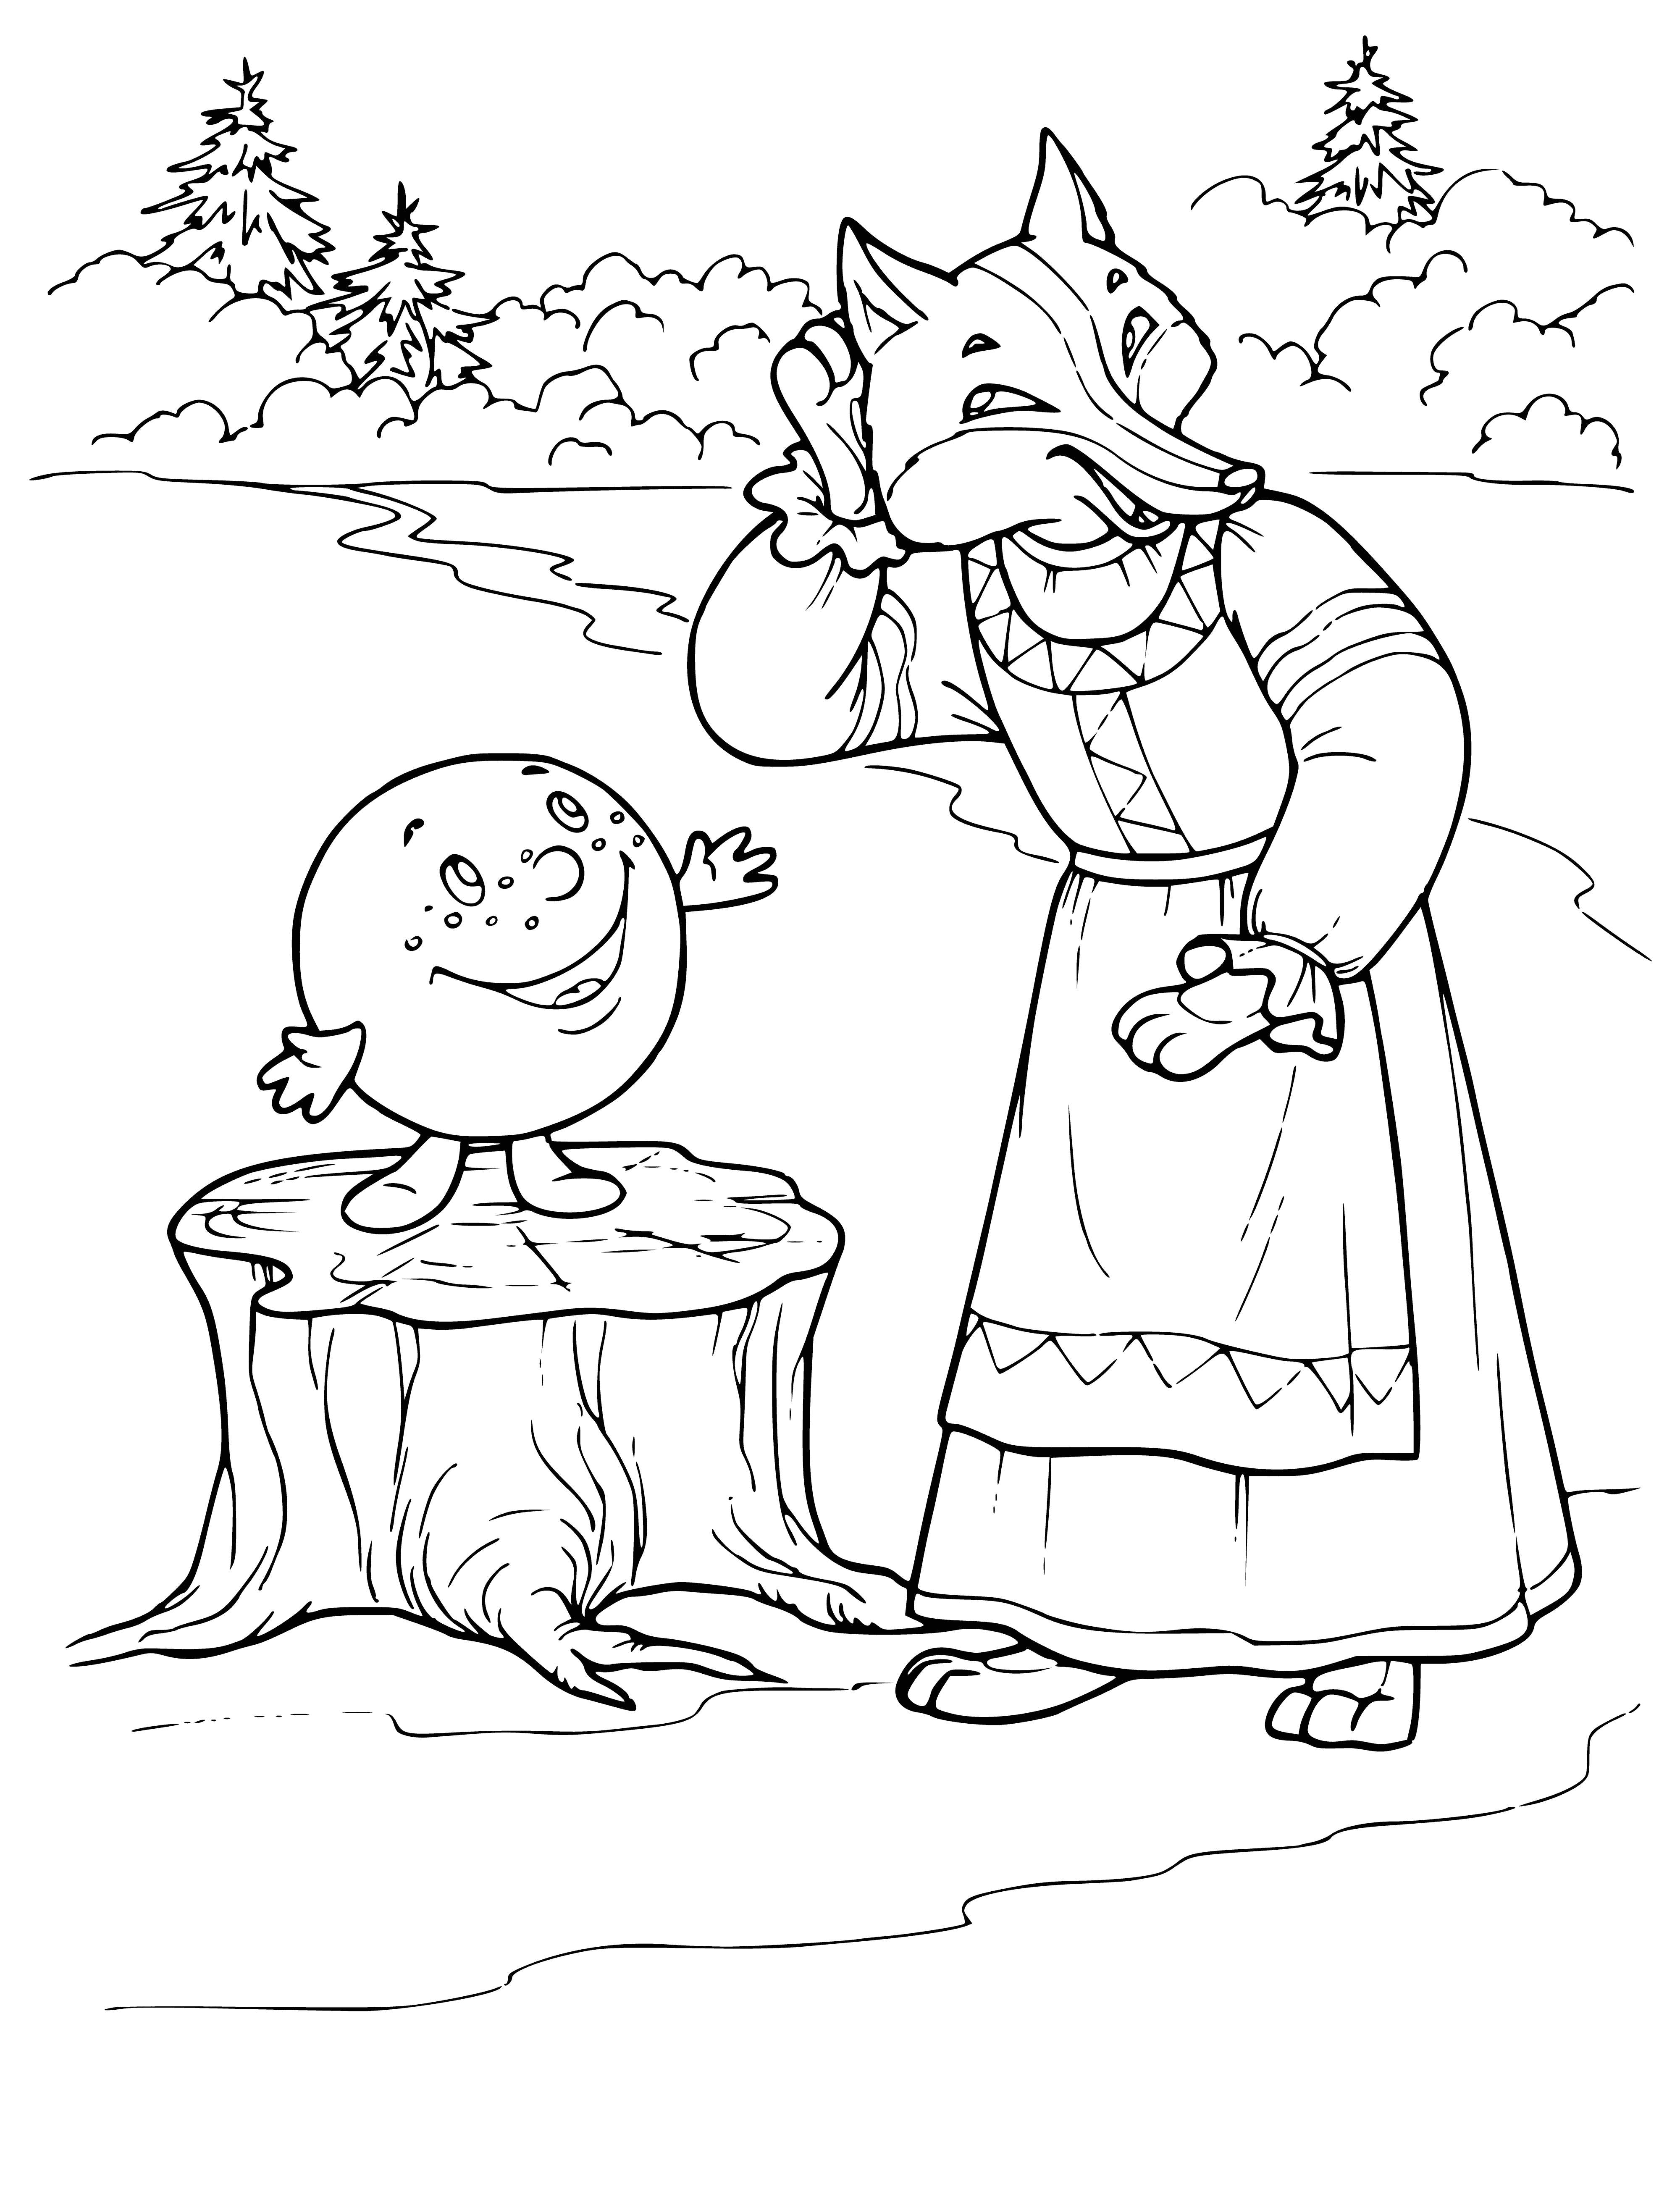 coloring page: A fox stands on hind legs wearing a red coat with a white fur collar, slyly holding a book. #coloringpage